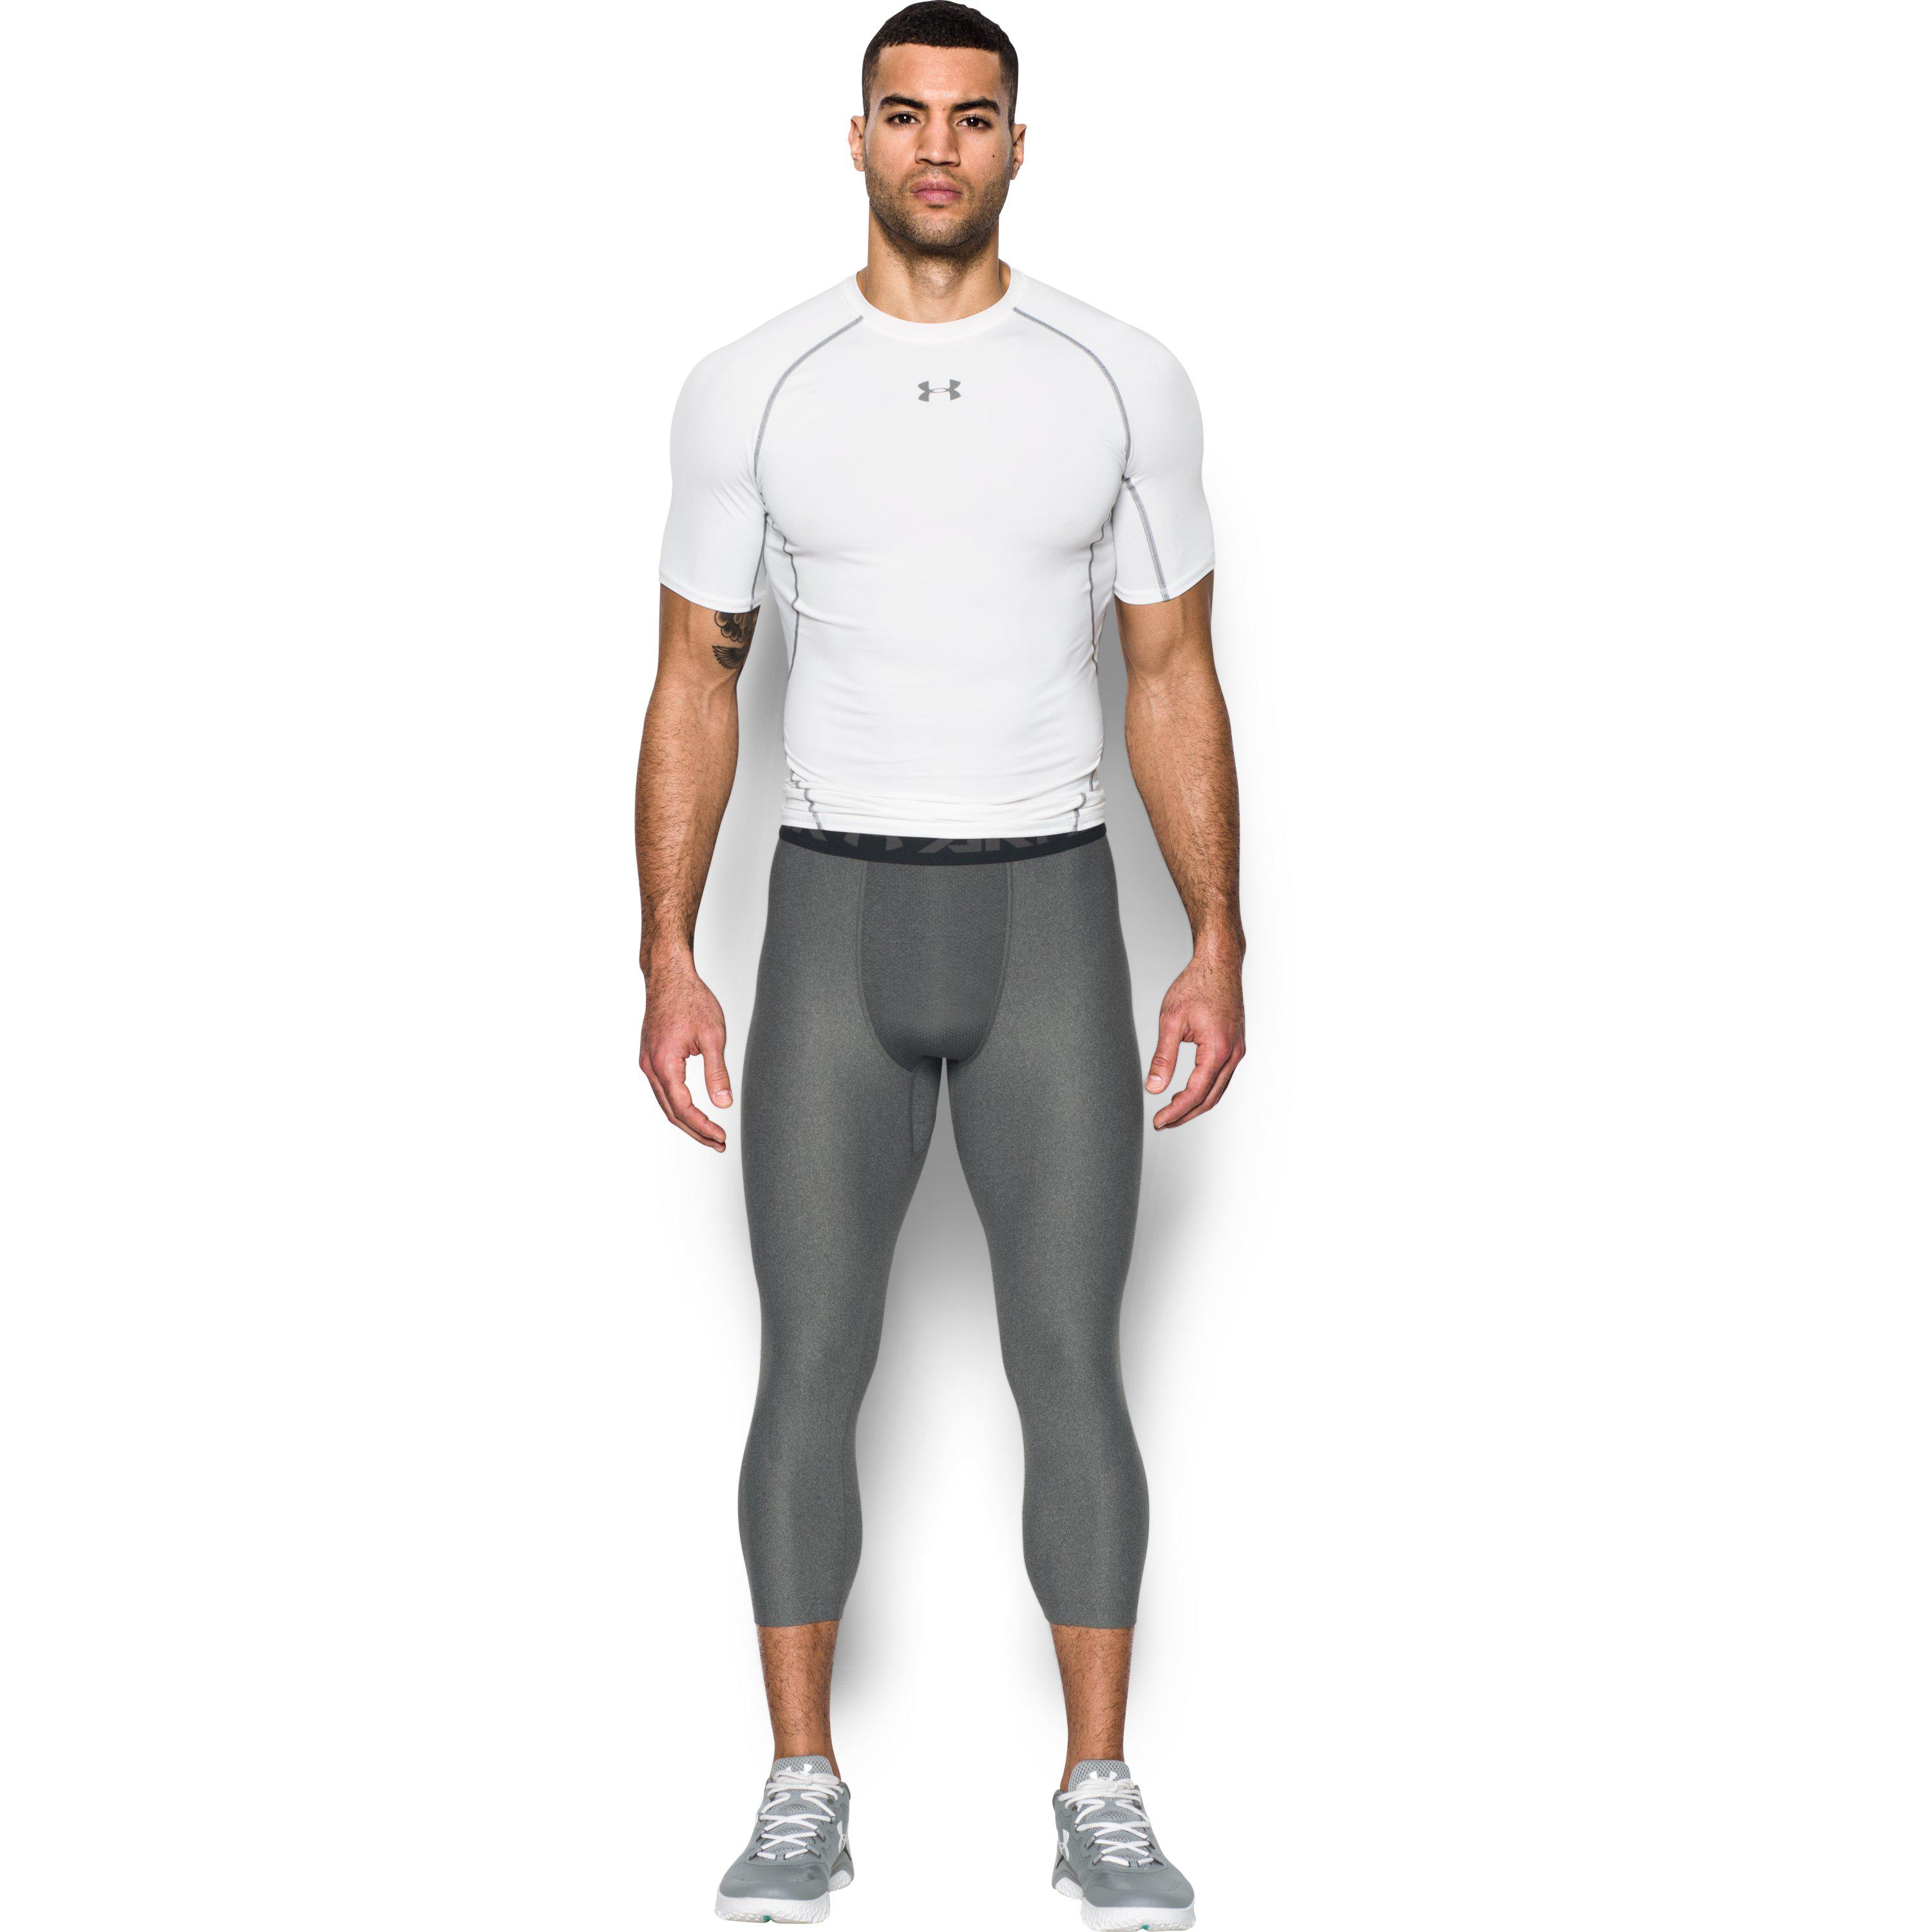 What To Wear With 3/4 Leggings For Men